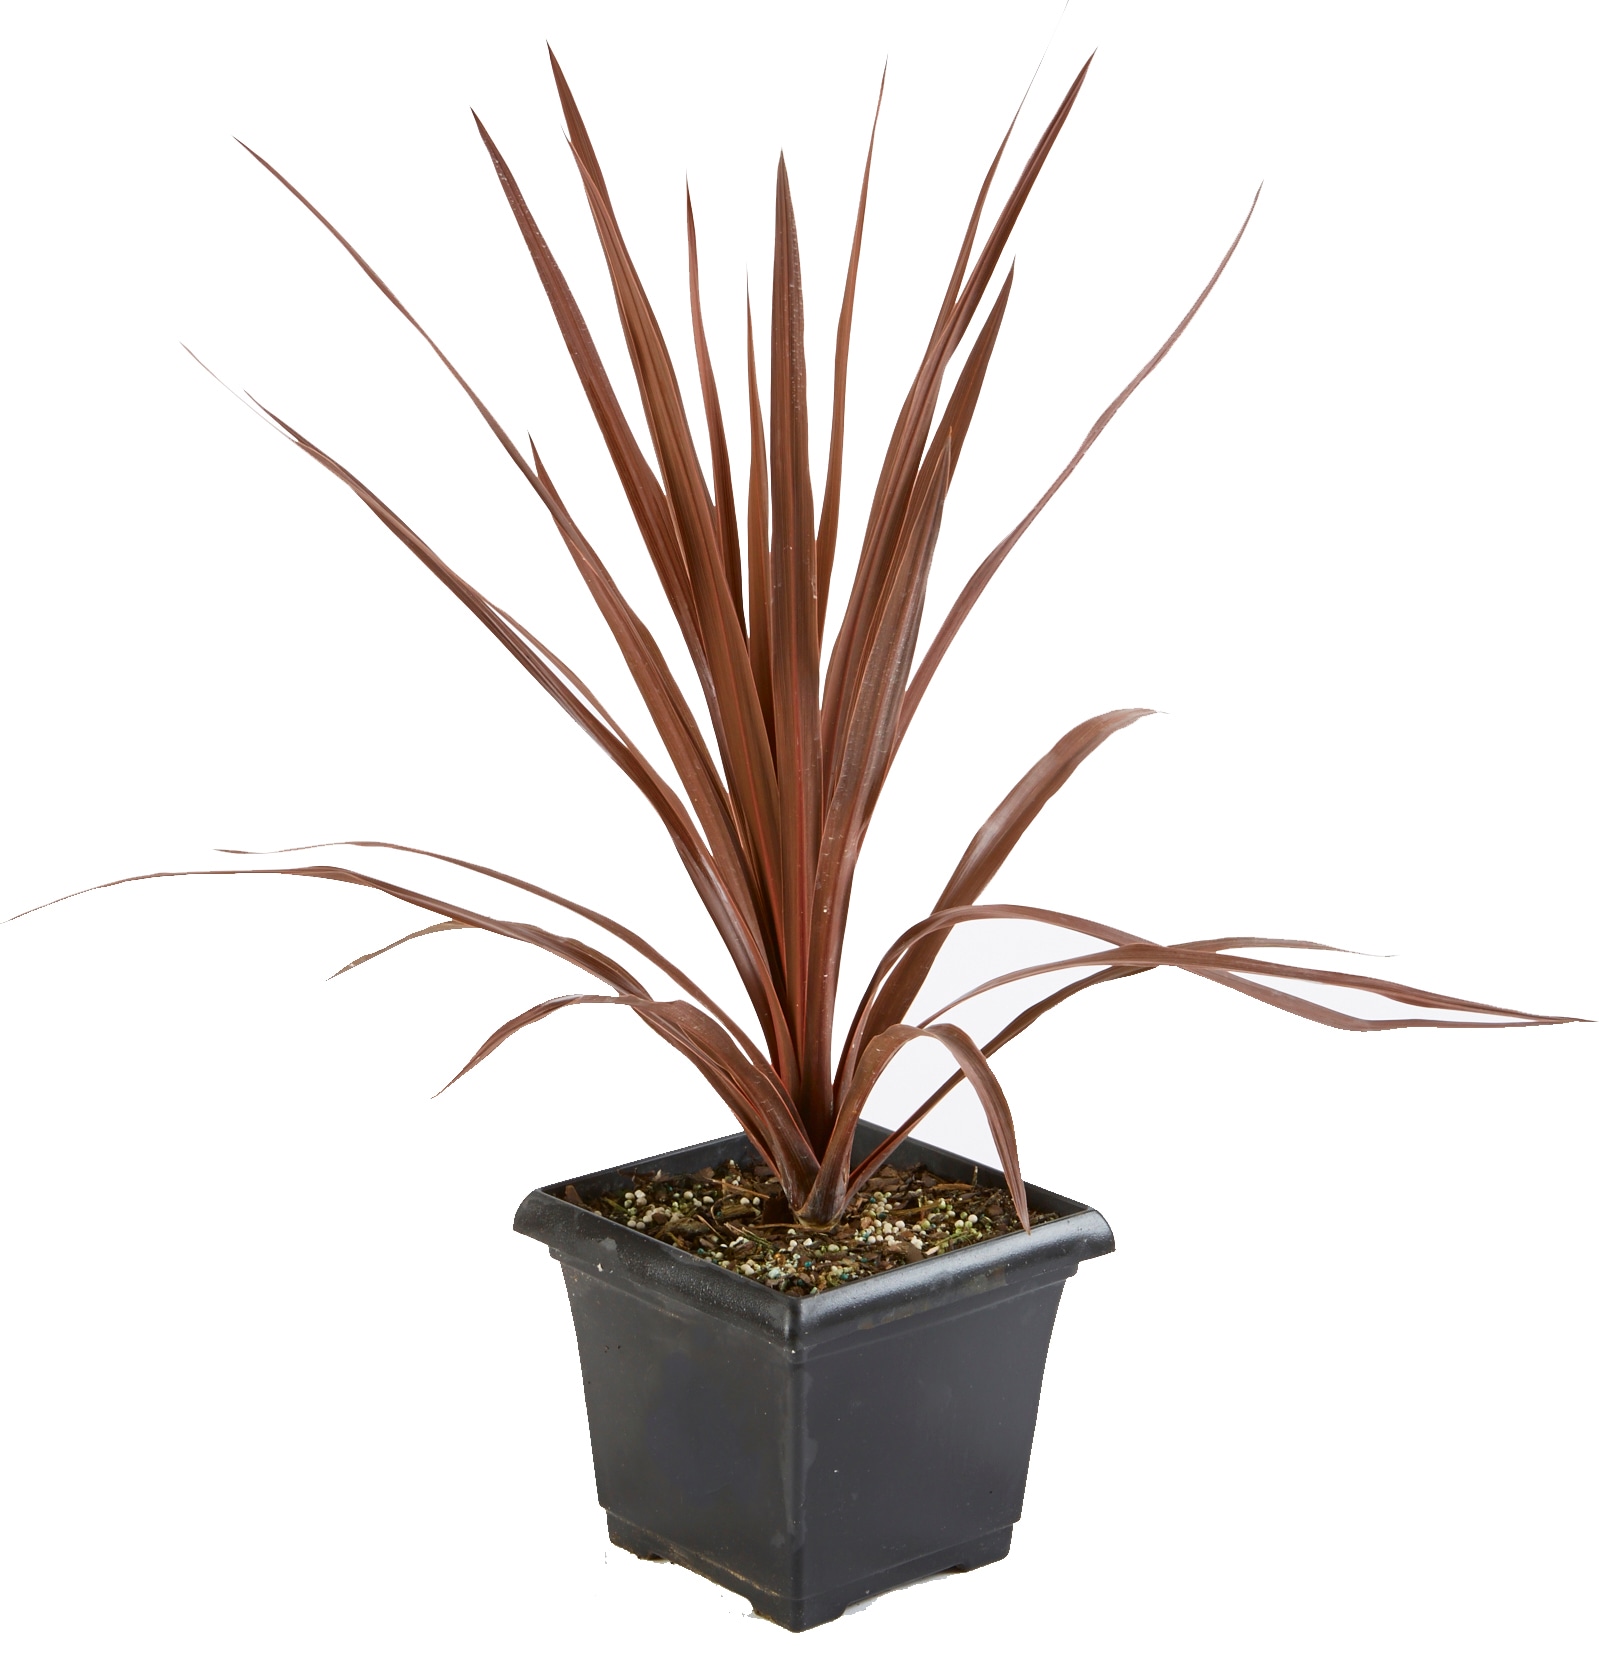 Cordyline in 1-Gallon Planter in Perennials department at Lowes.com